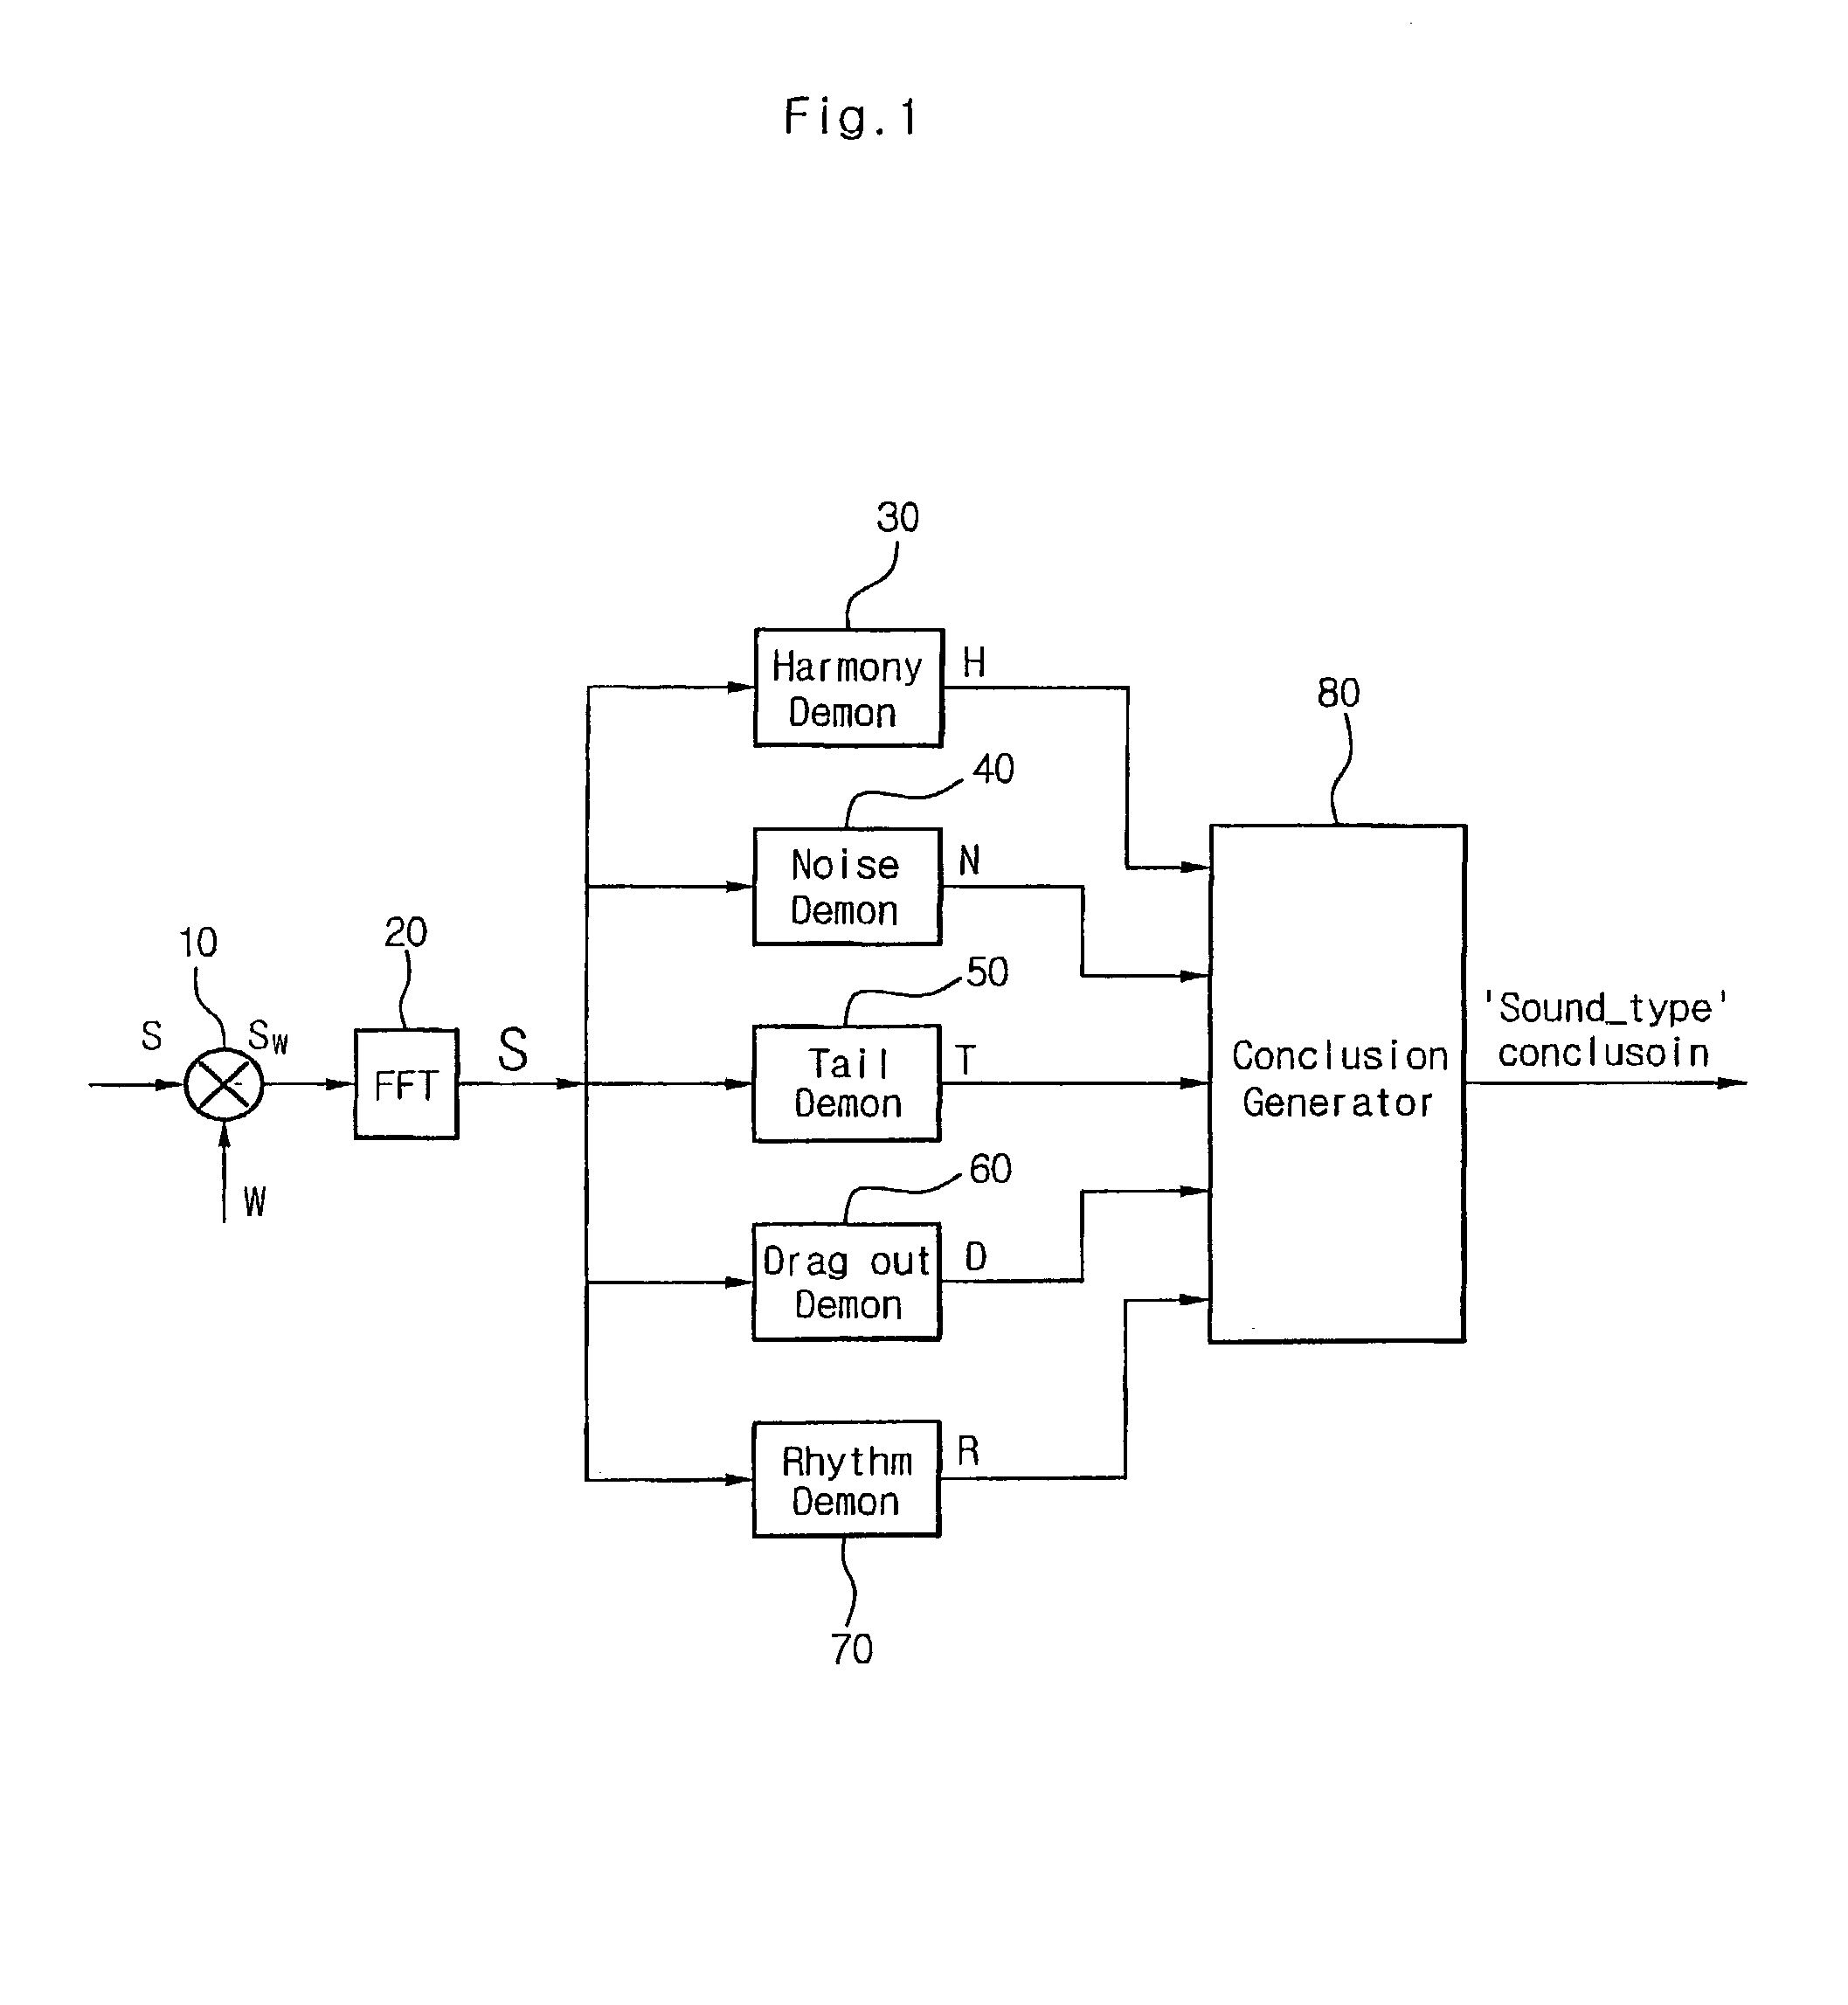 Method and system for distinguishing speech from music in a digital audio signal in real time